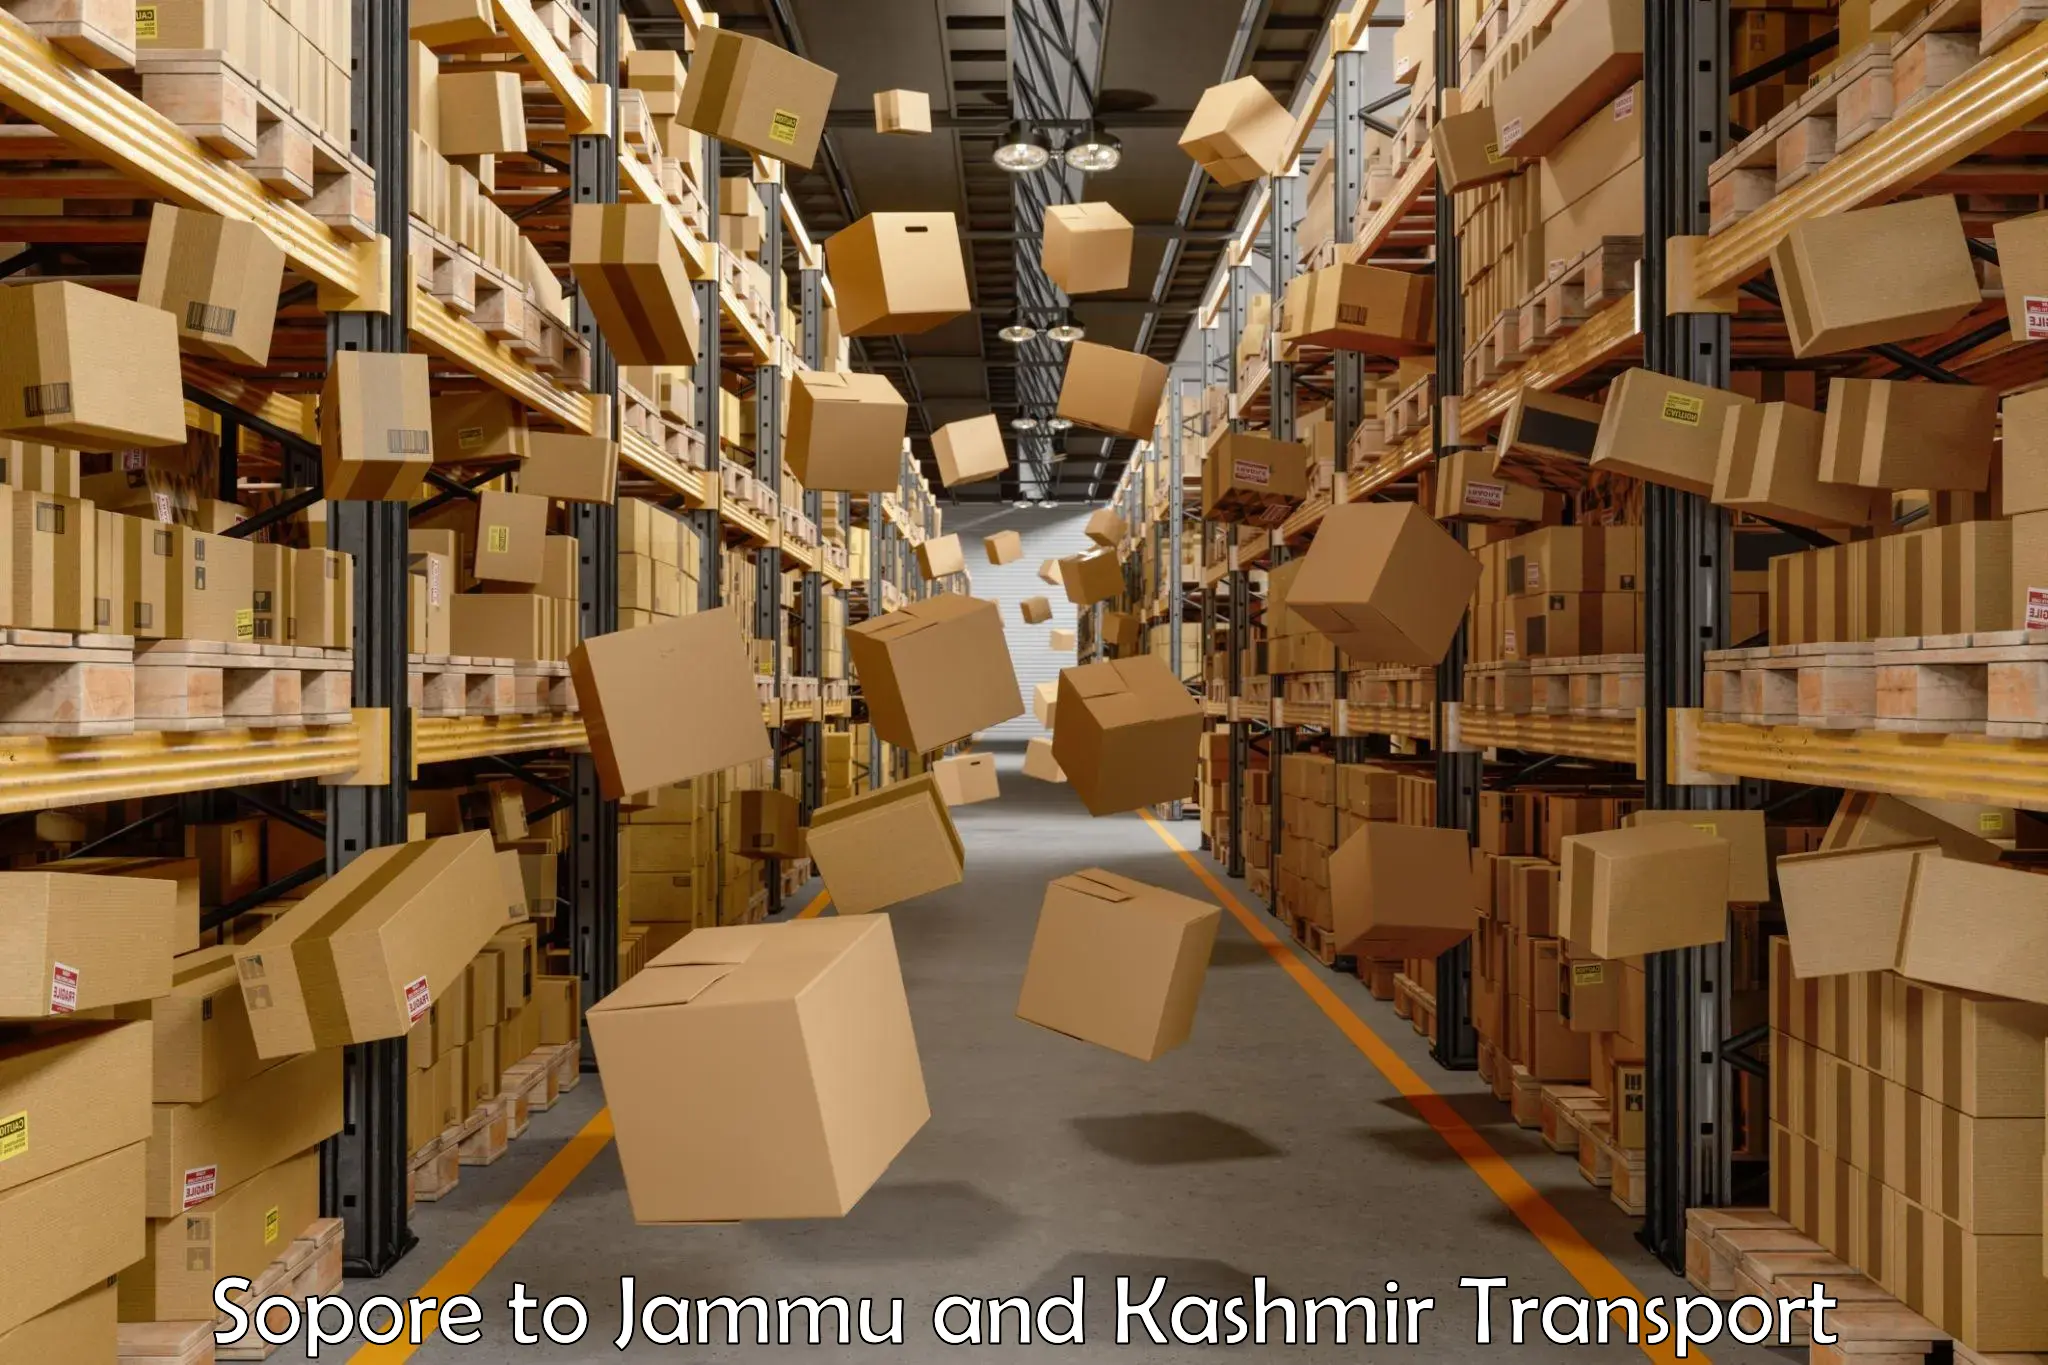 Material transport services Sopore to Shopian